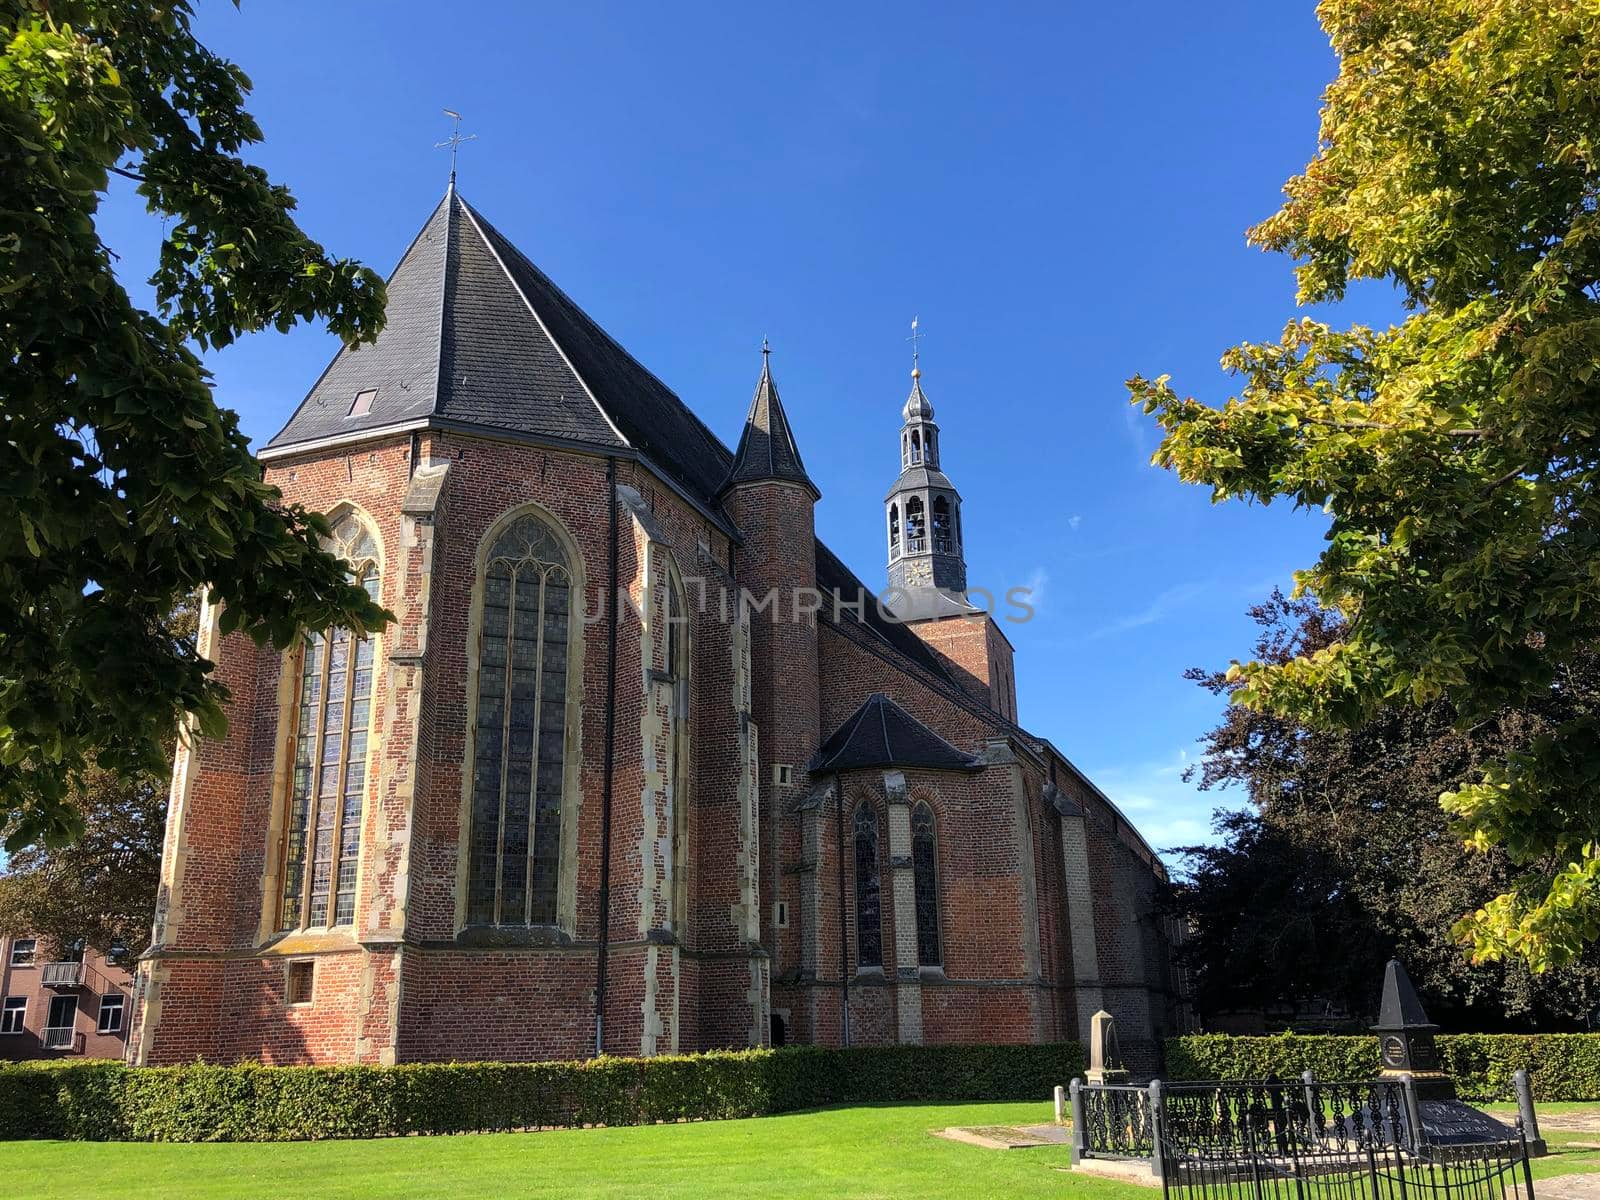 The old Calixtus church in Groenlo, The Netherlands